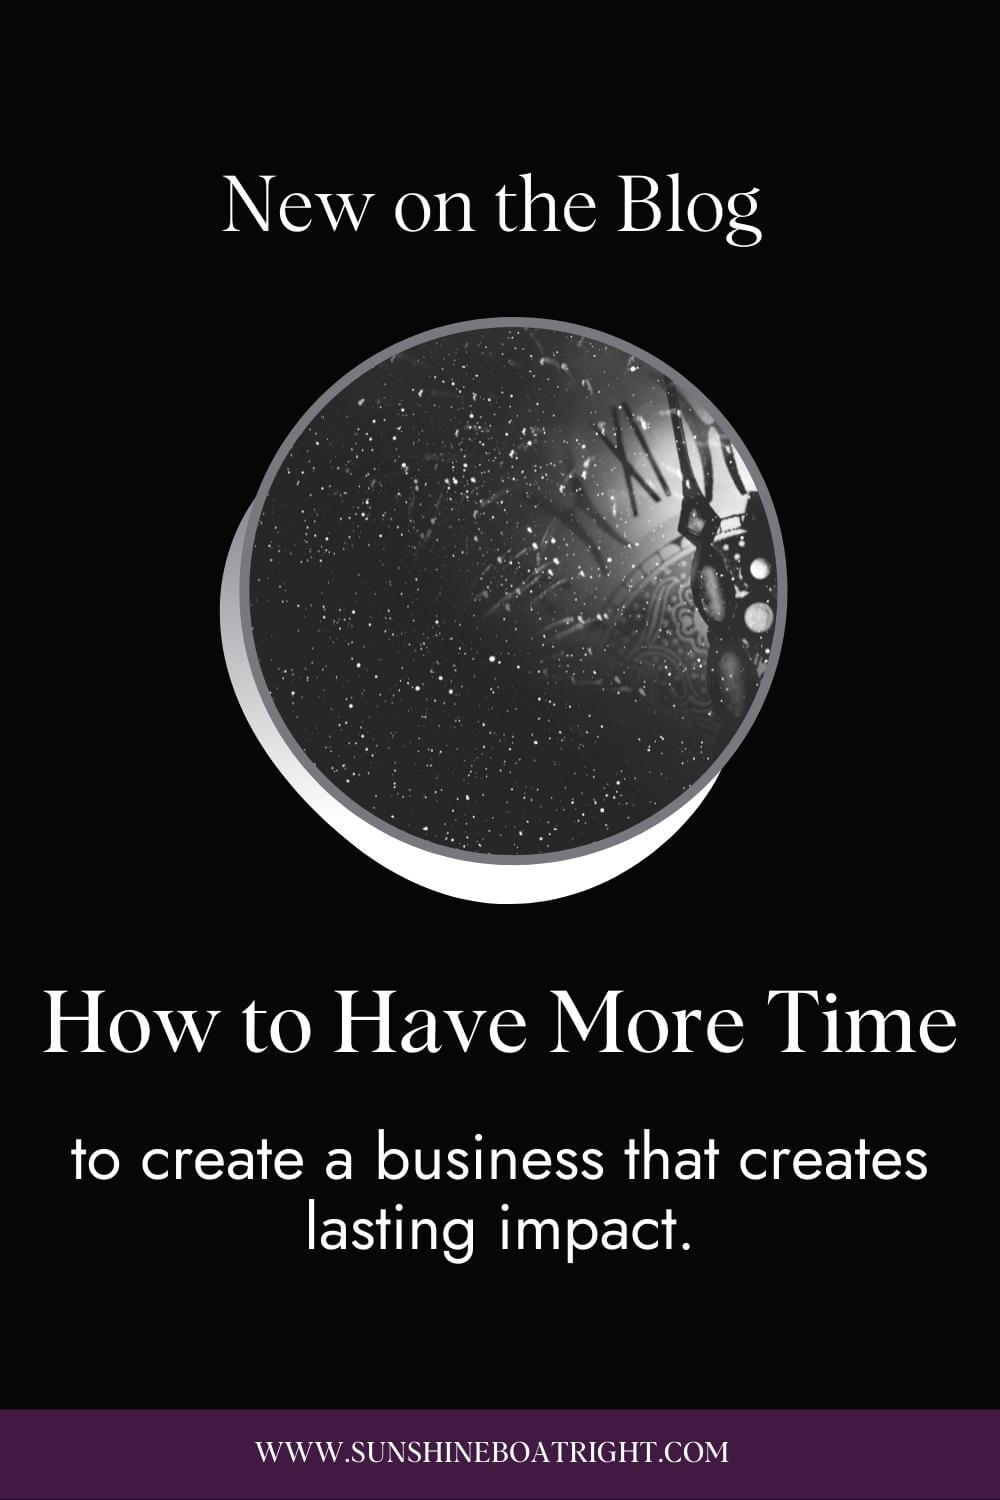 Black background with white & black clock and title: New on the Blog: How to Have More Time to create a business that creates lasting impact. www.sunshineboatright.com